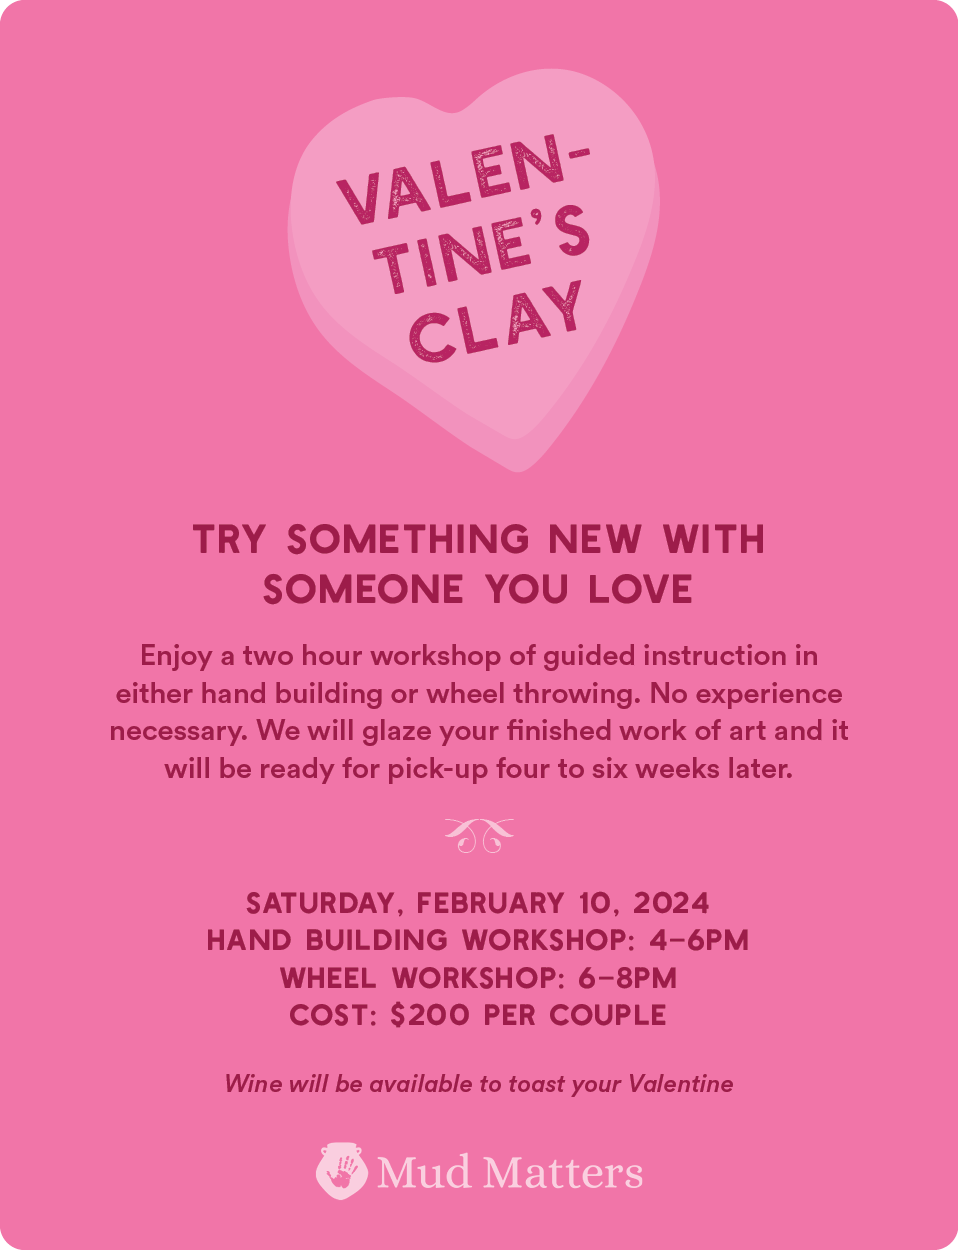 Hearts Precious Metal Clay [Class in NYC] @ Annealed Studio